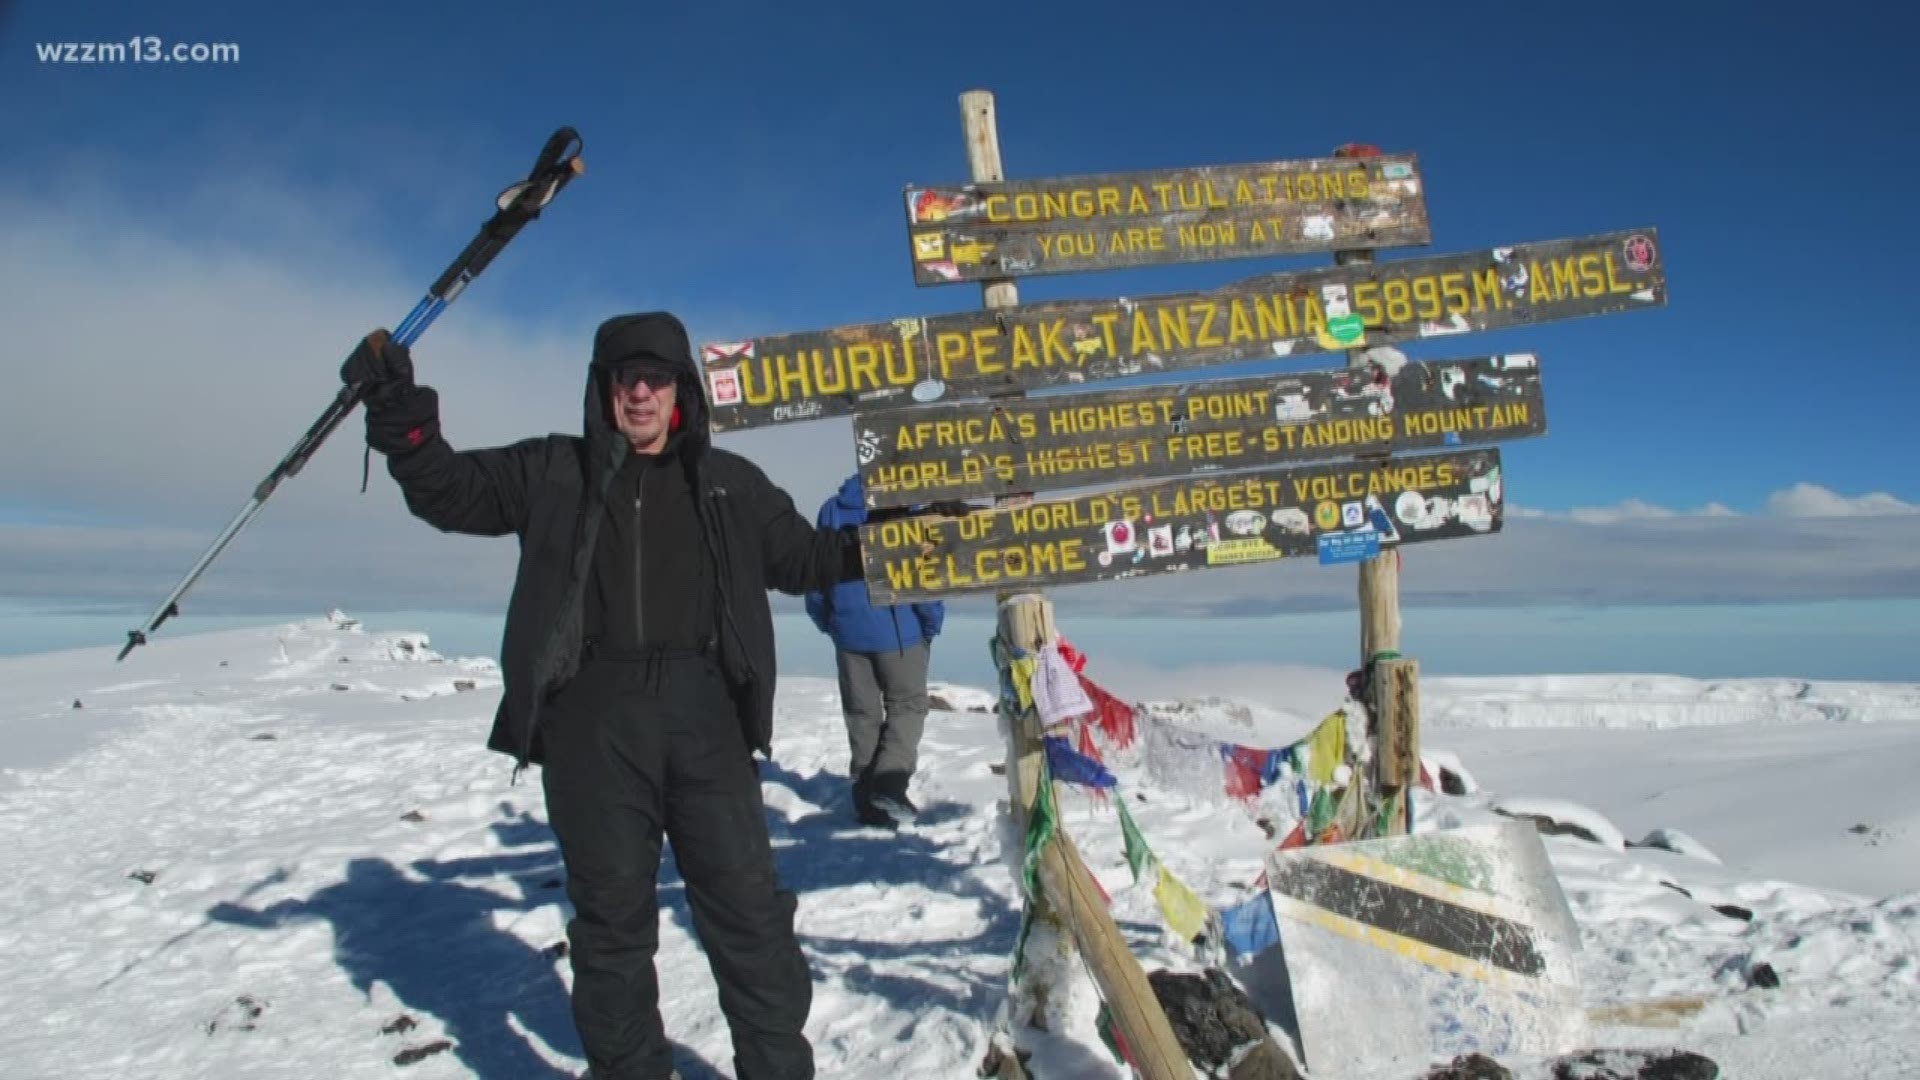 84-year-old lakeshore man plans to conquer Mt. Kilimanjaro for a second time